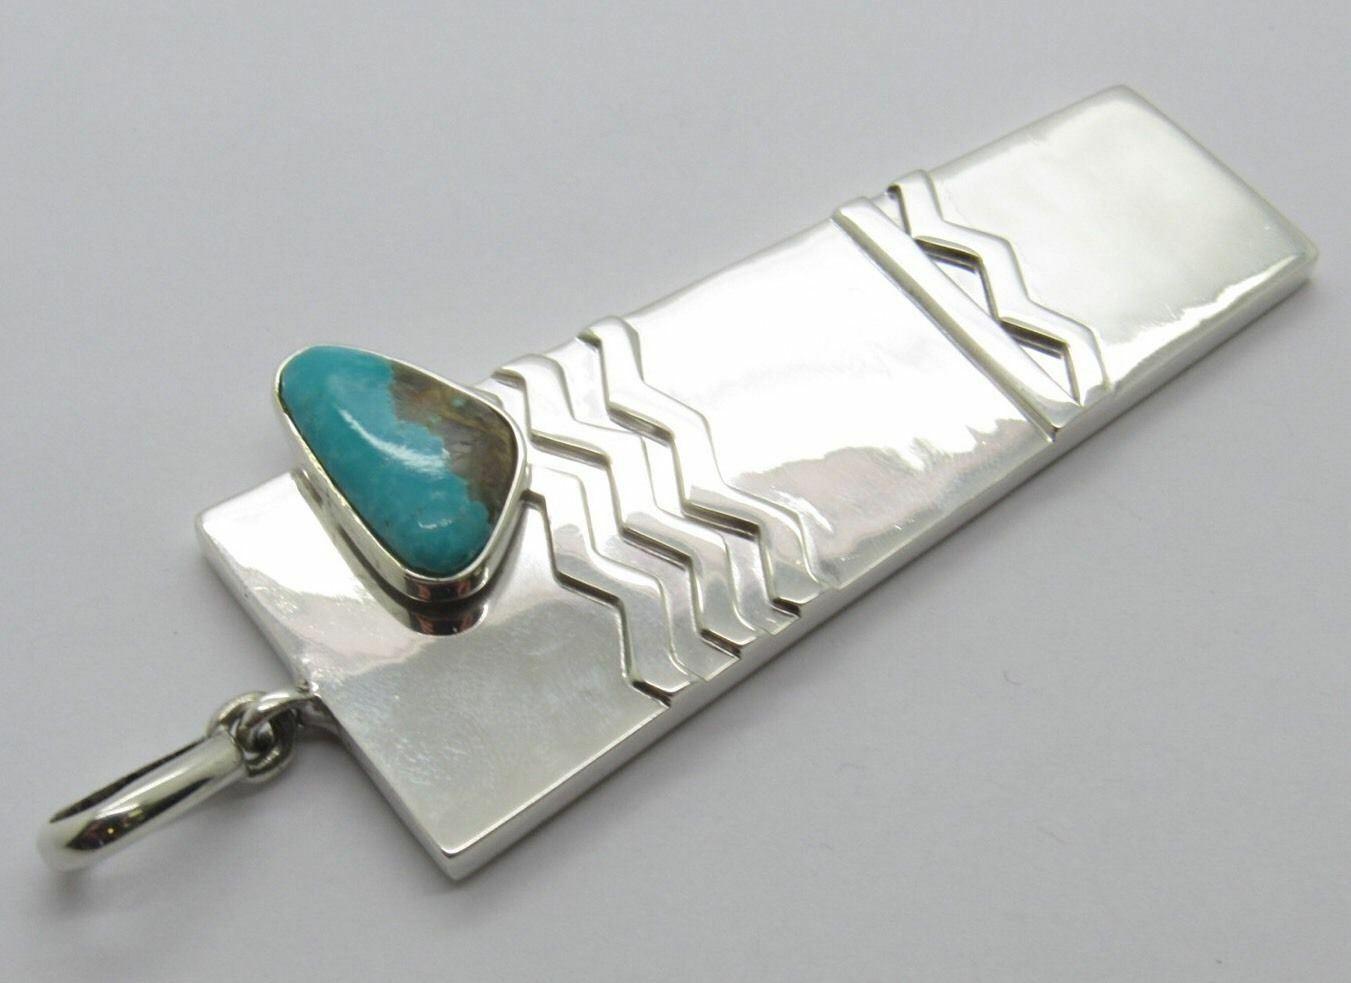 Taxco Mexico Sterling Silver Turquoise Textured Pendant In Good Condition For Sale In Washington Depot, CT